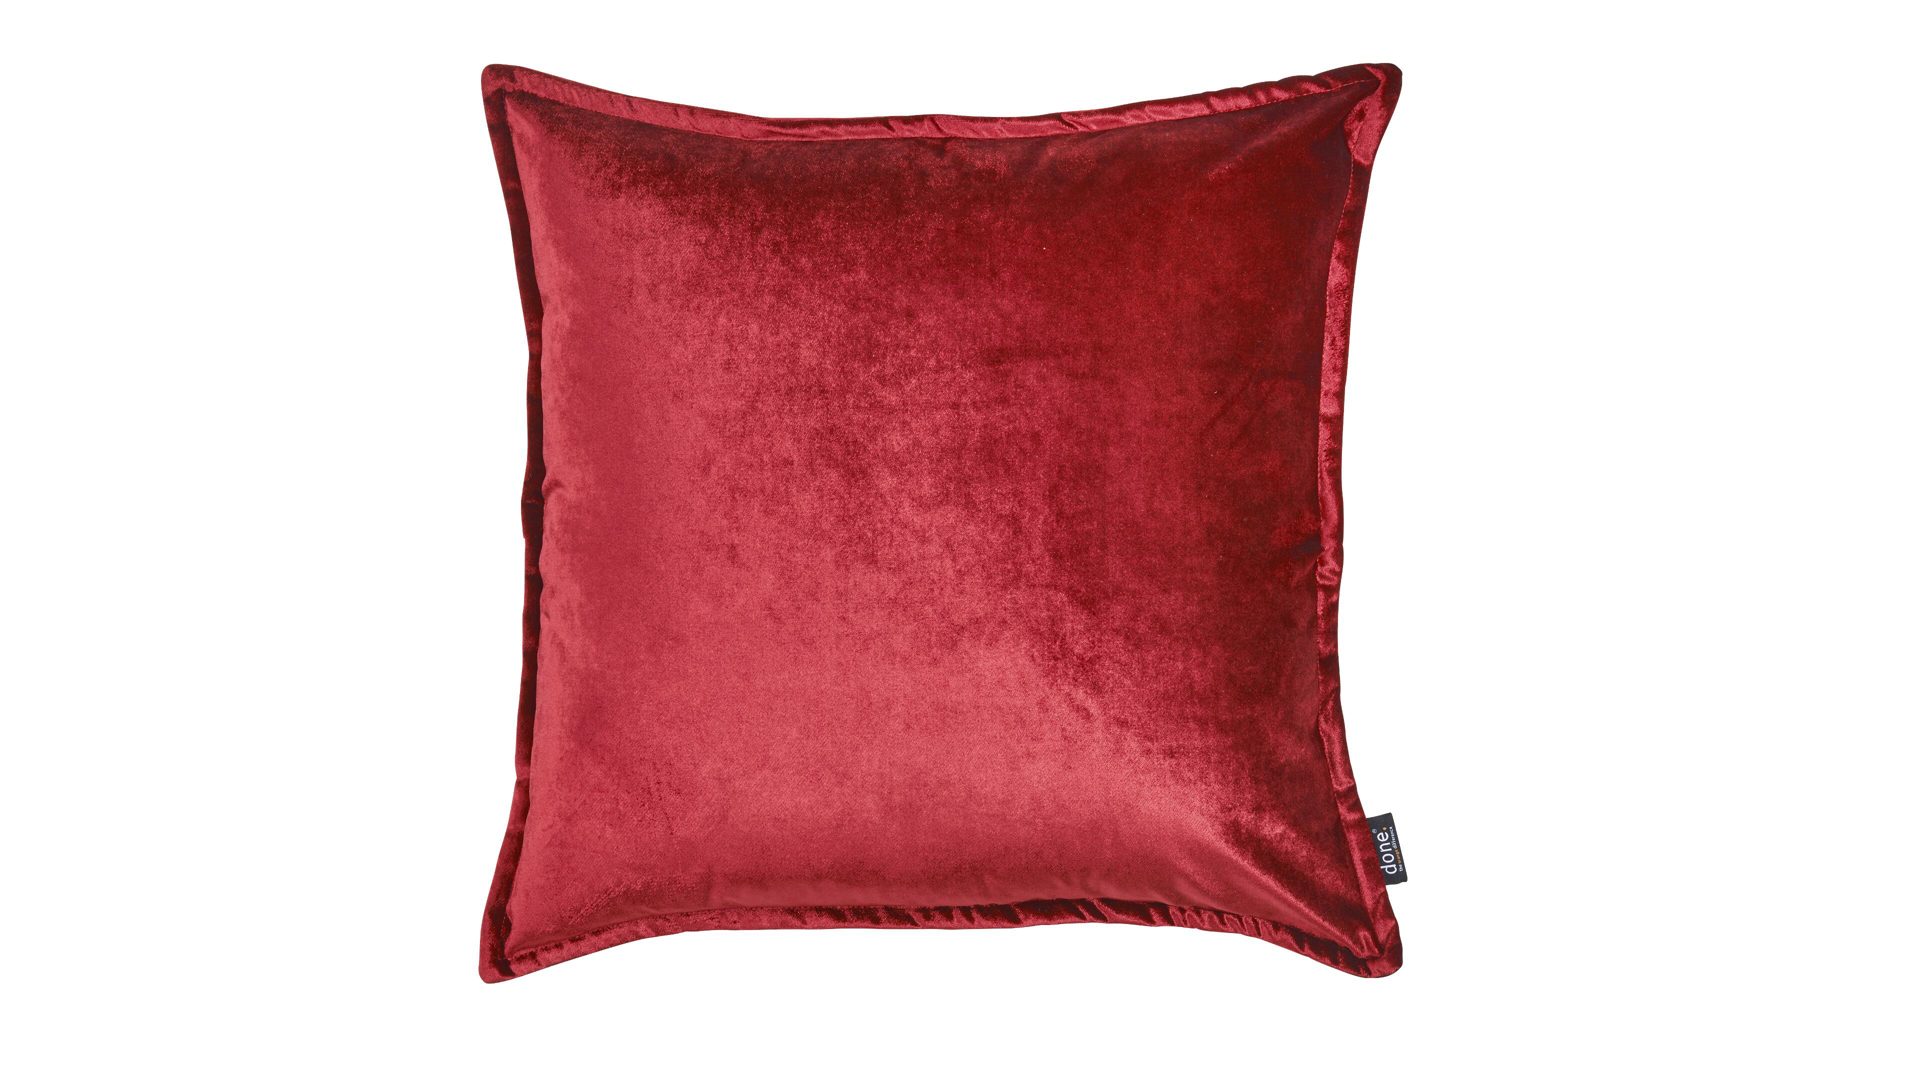 Kissenbezug /-hülle Done® by karabel home company aus Stoff in Dunkelrot DONE® Kissenhülle Cushion Glam roter Samt – ca. 65 x 65 cm